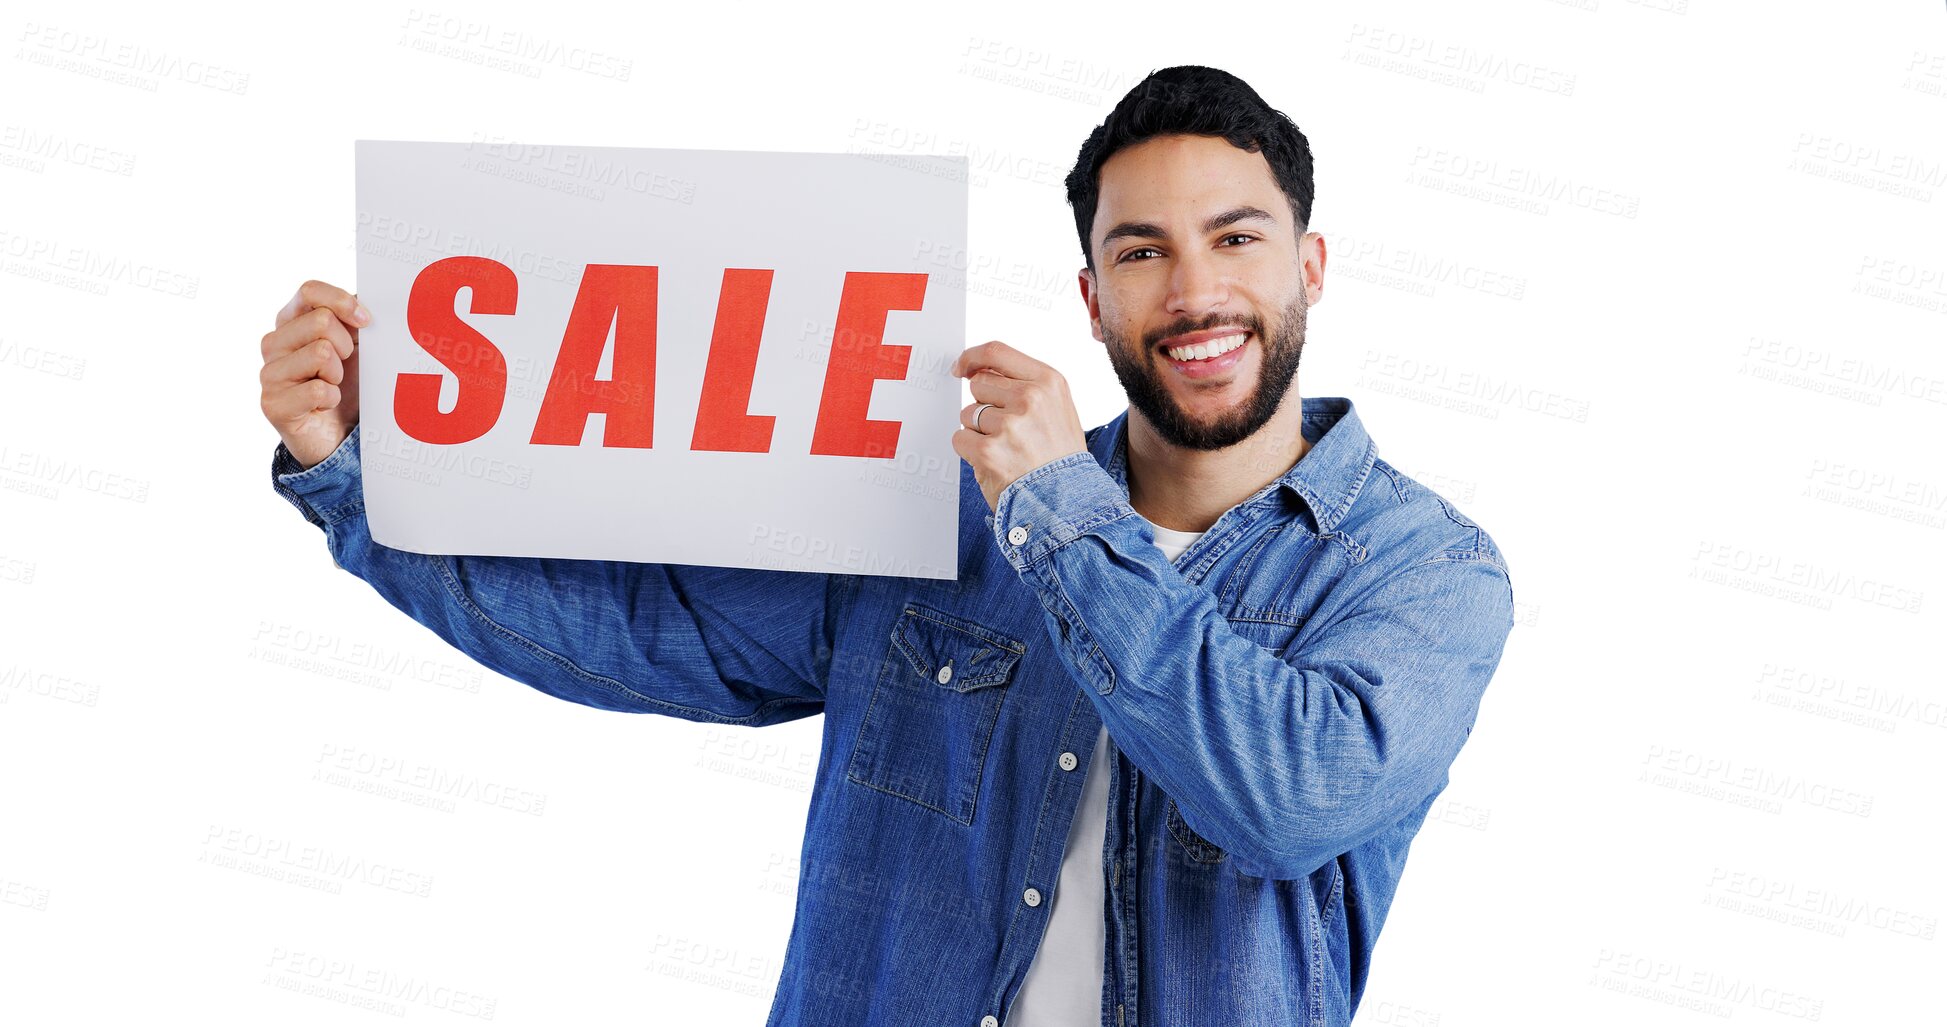 Buy stock photo Portrait, happy man and poster for sale, news or information on isolated, transparent or png background. Banner, announcement or male person with notice of retail, discount or shopping mall promotion